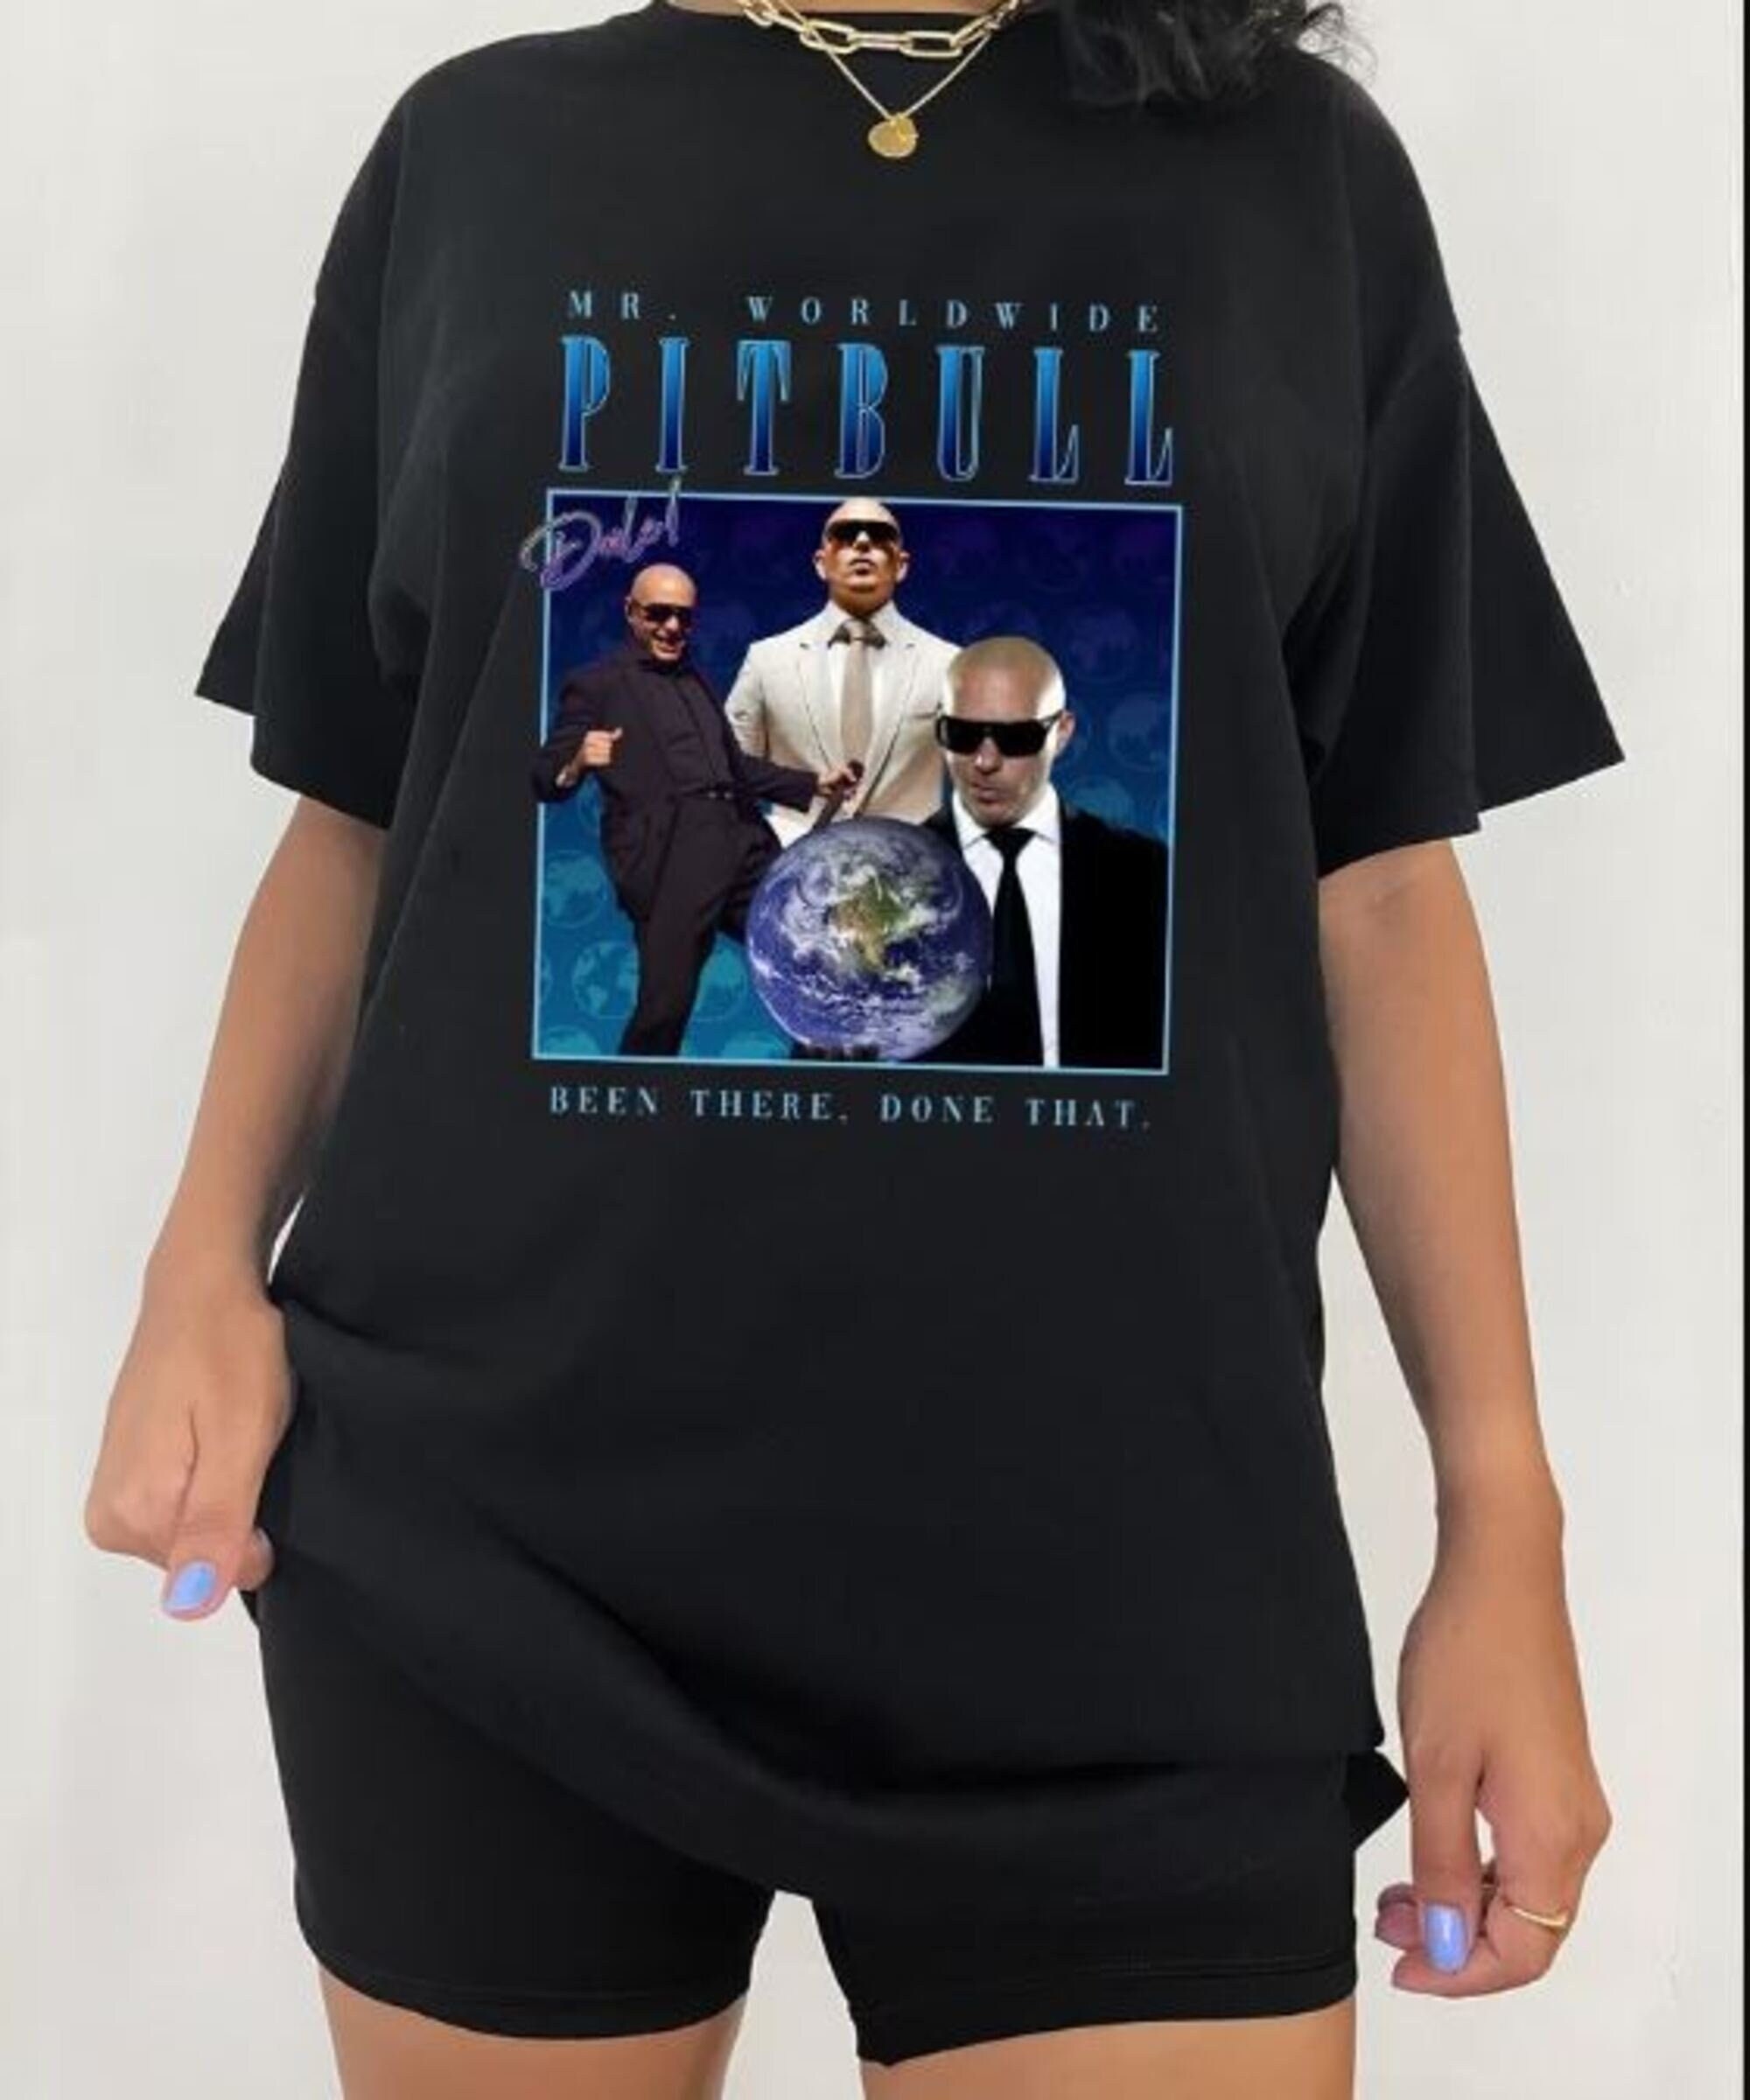 Discover Mr Worldwide Pitbull Shirt, Hip Hop Shirt, Been There Done That Shirt